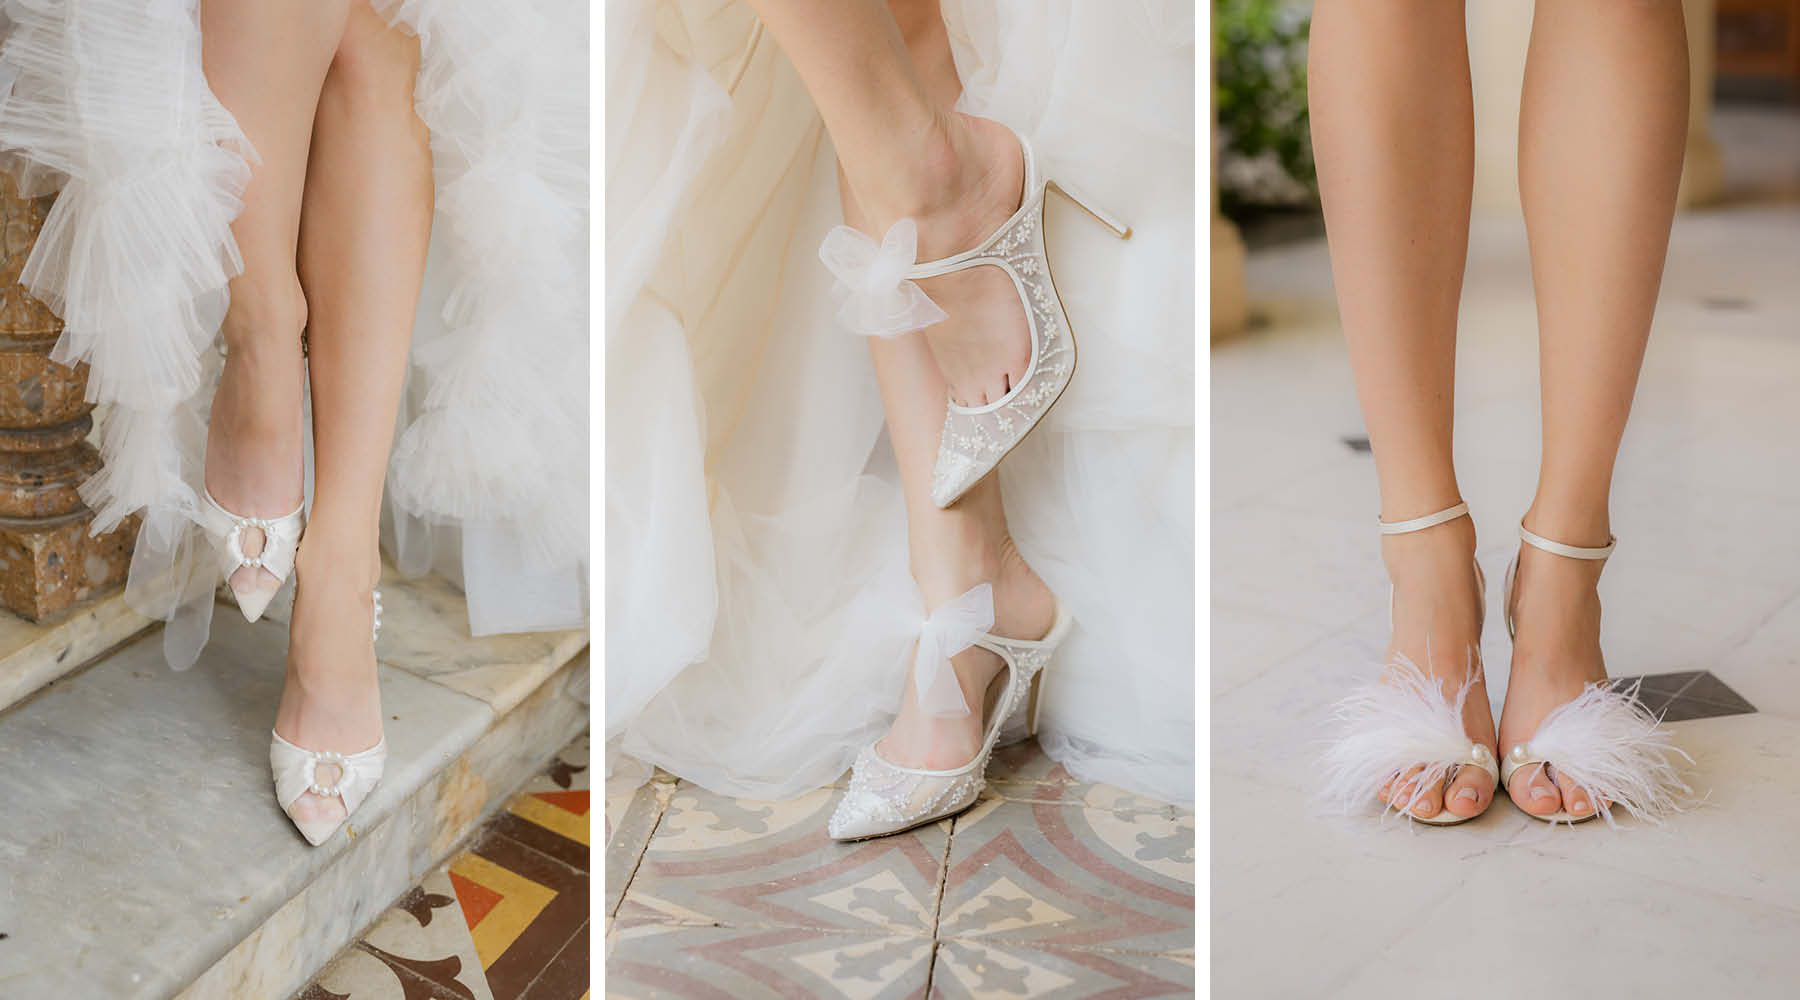 Our predictions for next years top bridal shoe trends! What do you